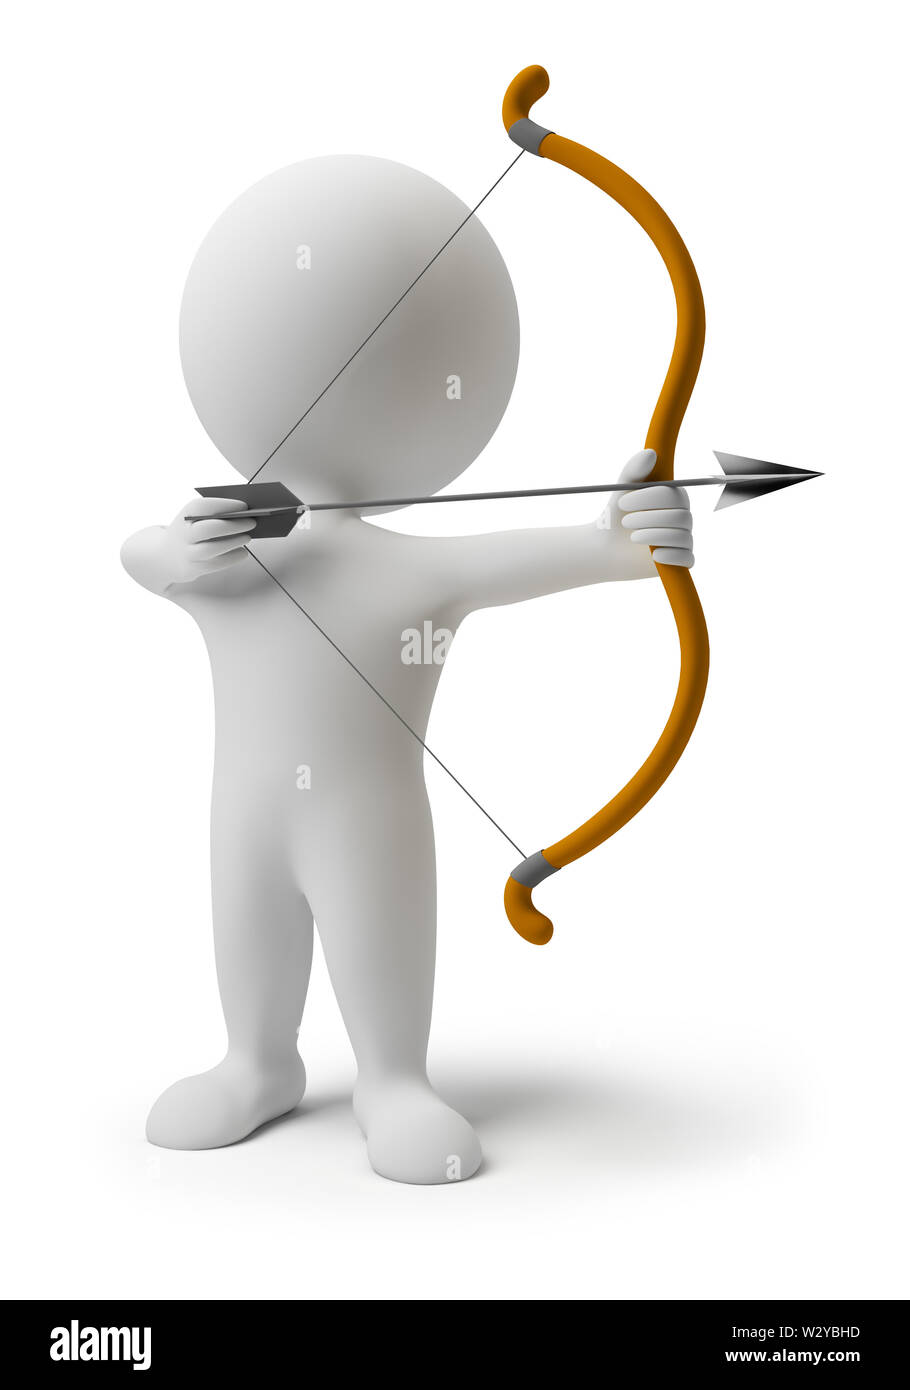 3d small people prepare for shooting an arrow. 3d image. Isolated white background. Stock Photo